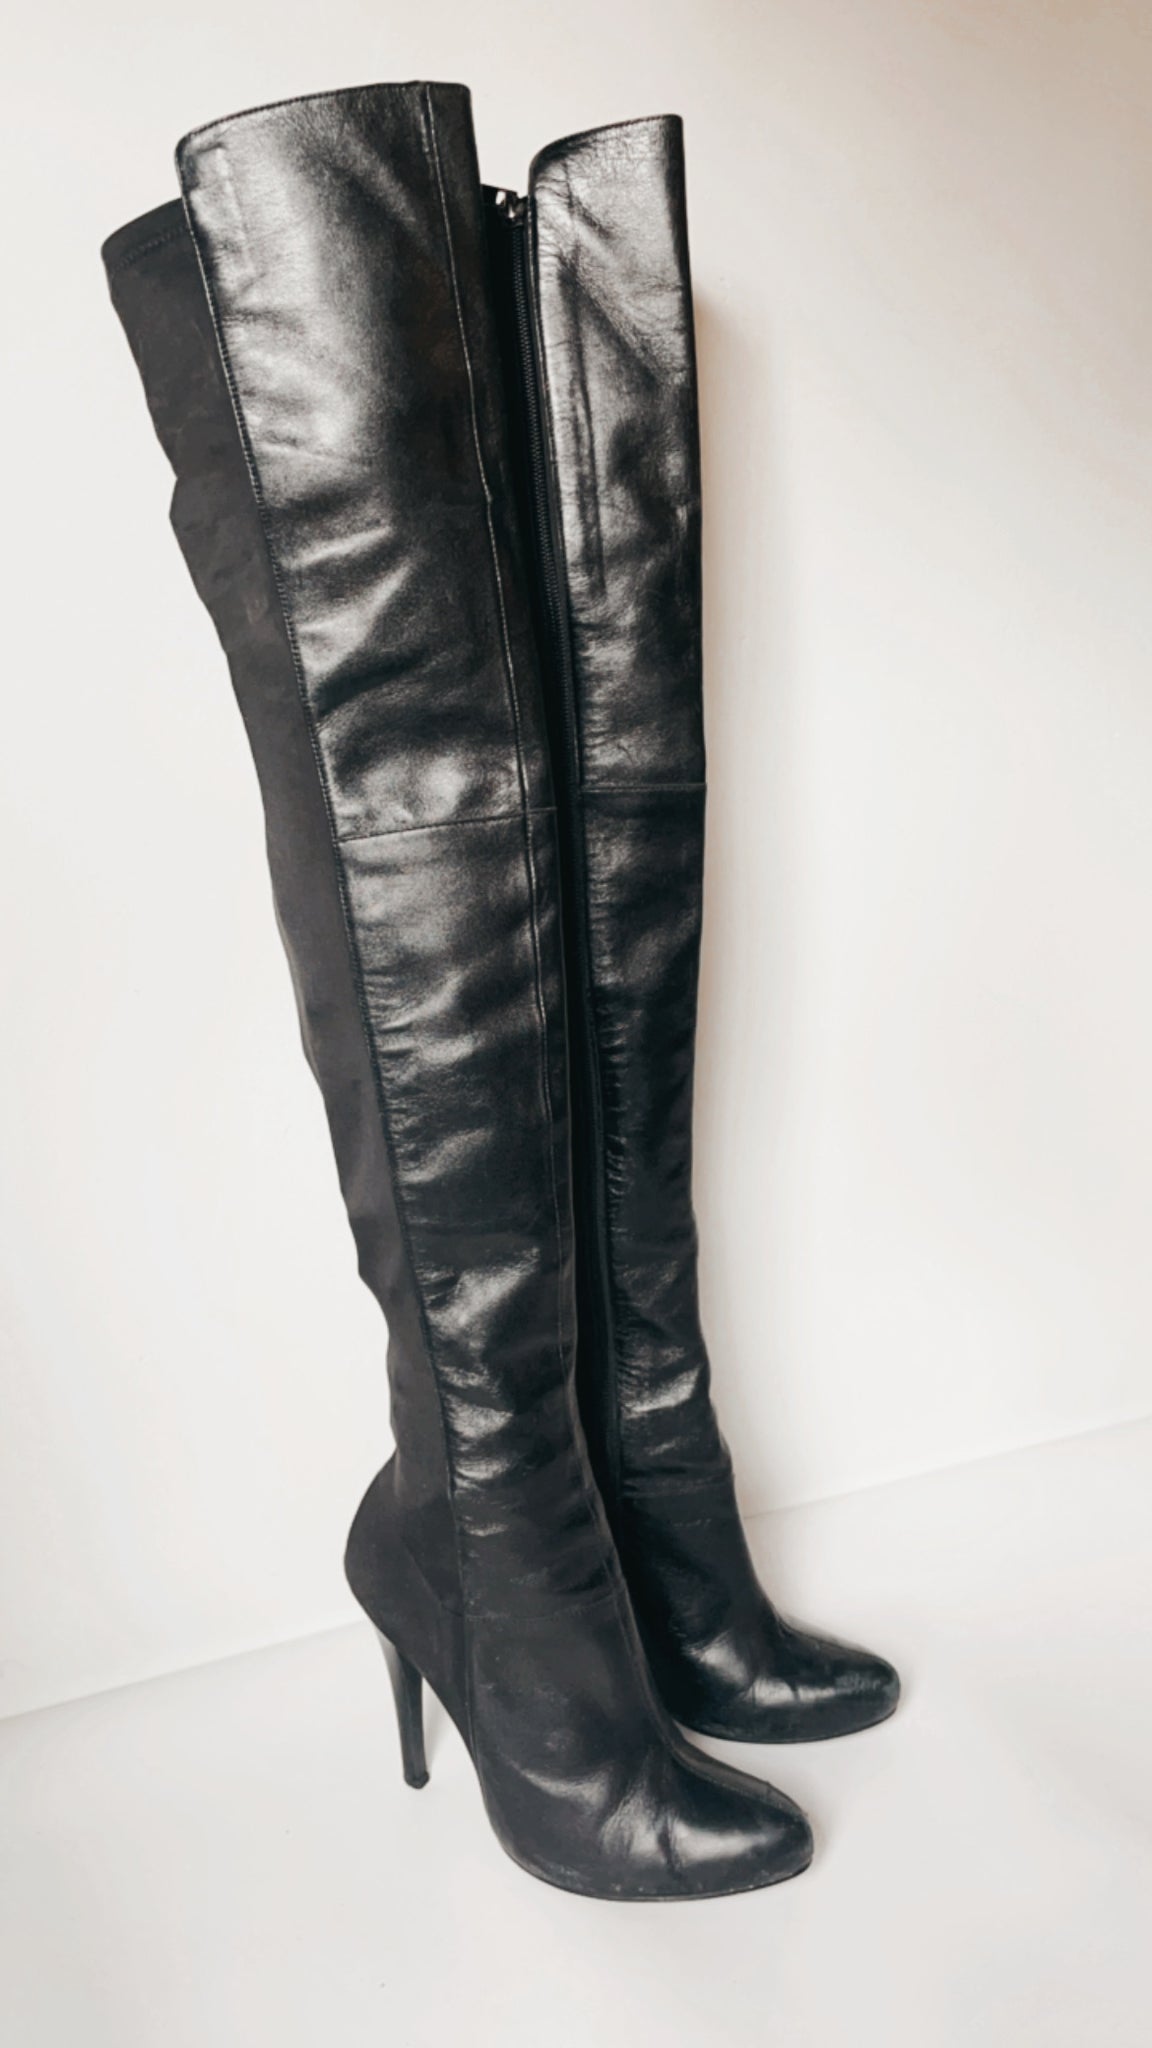 ‘Colin Stuart’ black leather thigh high boot 6